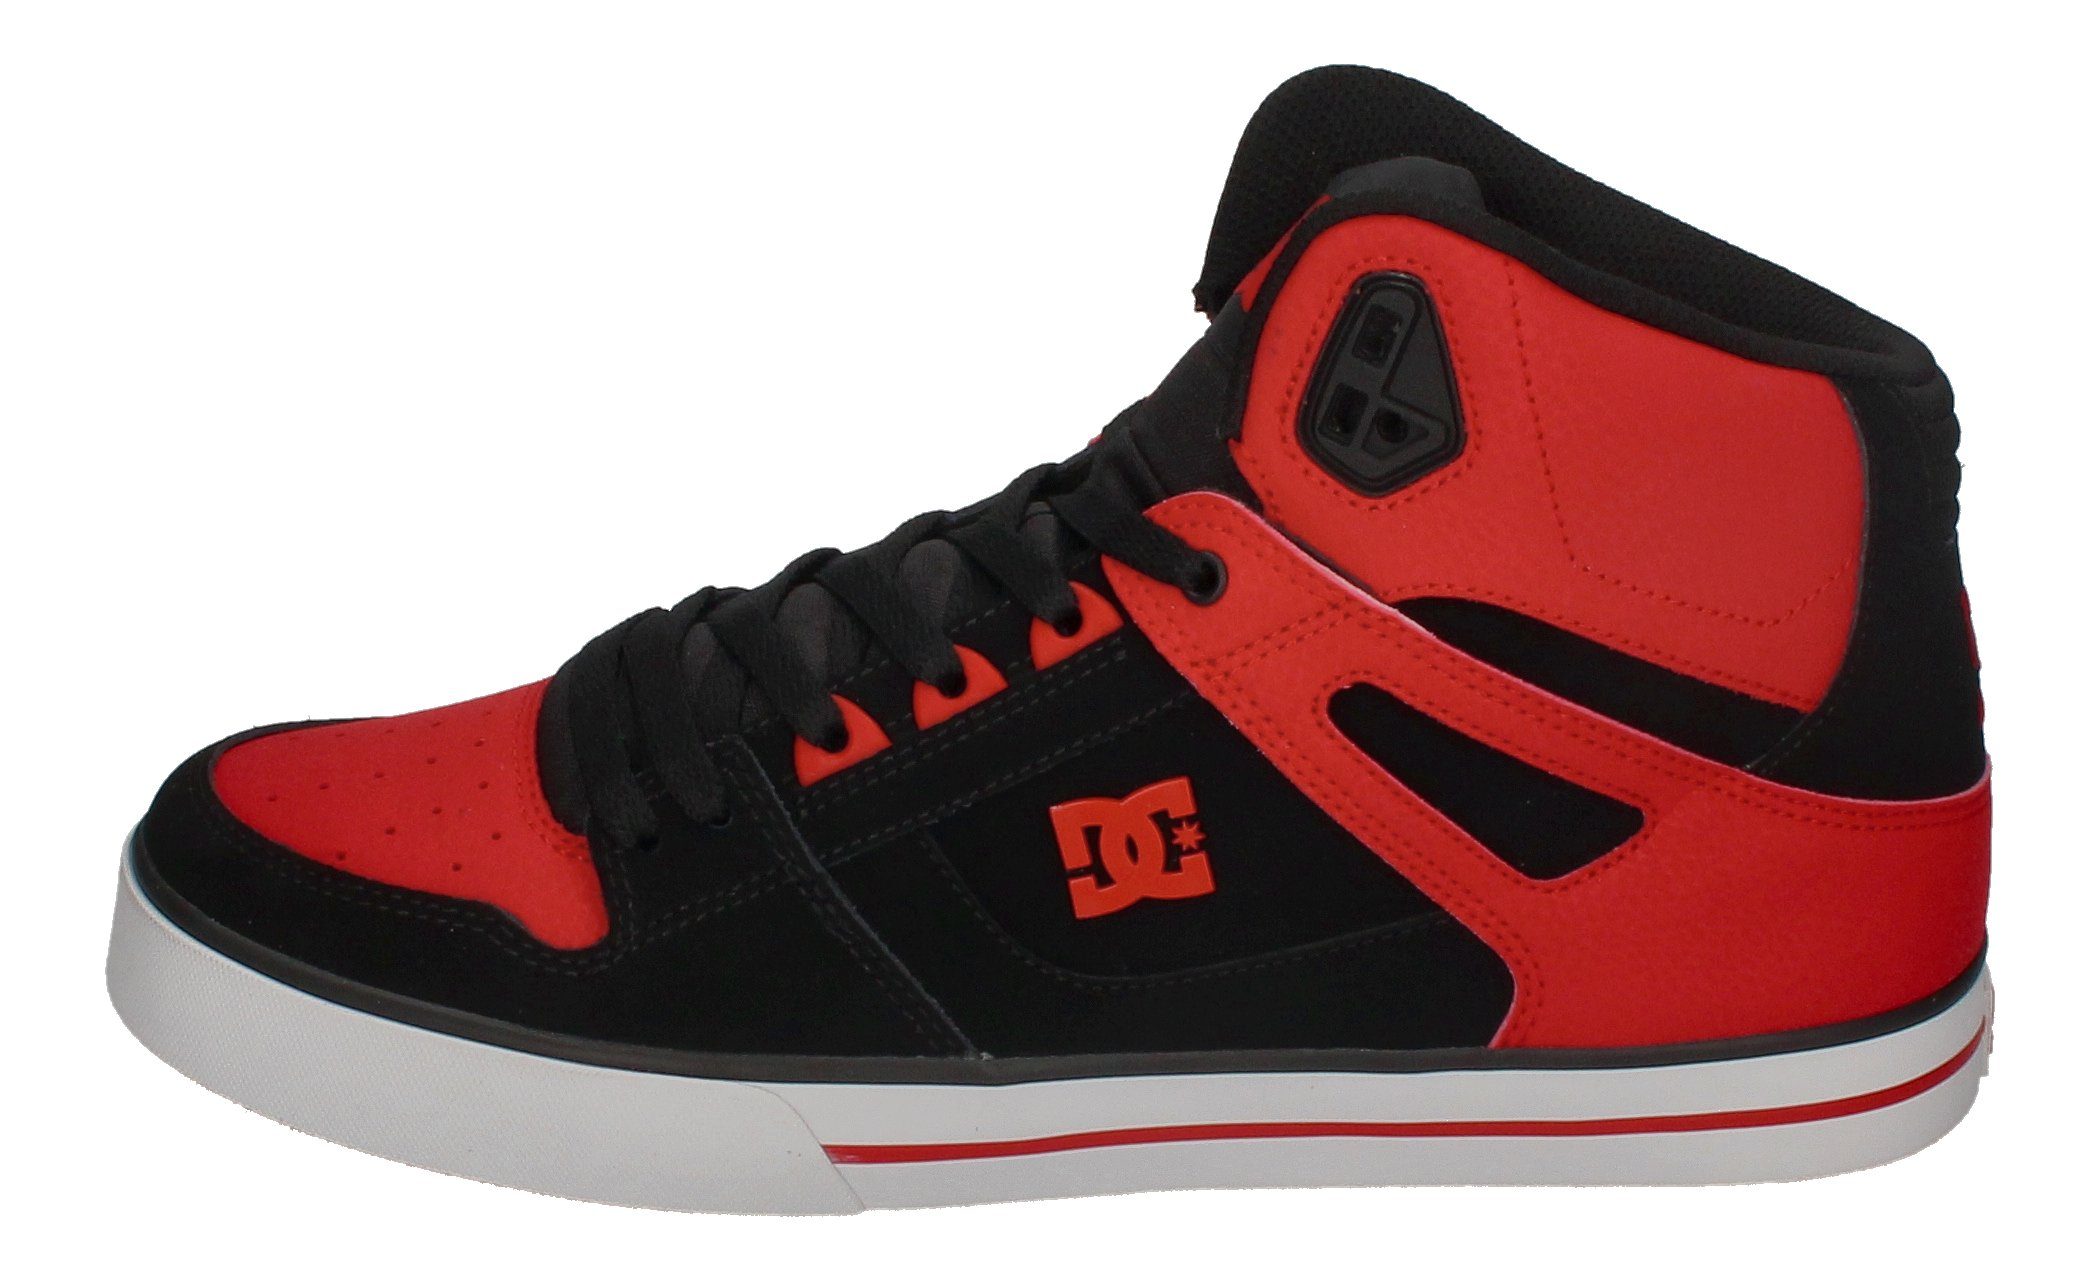 Schuhe Sneaker DC Shoes Pure HT WC ADYS400043 Skateschuh fiery red white black